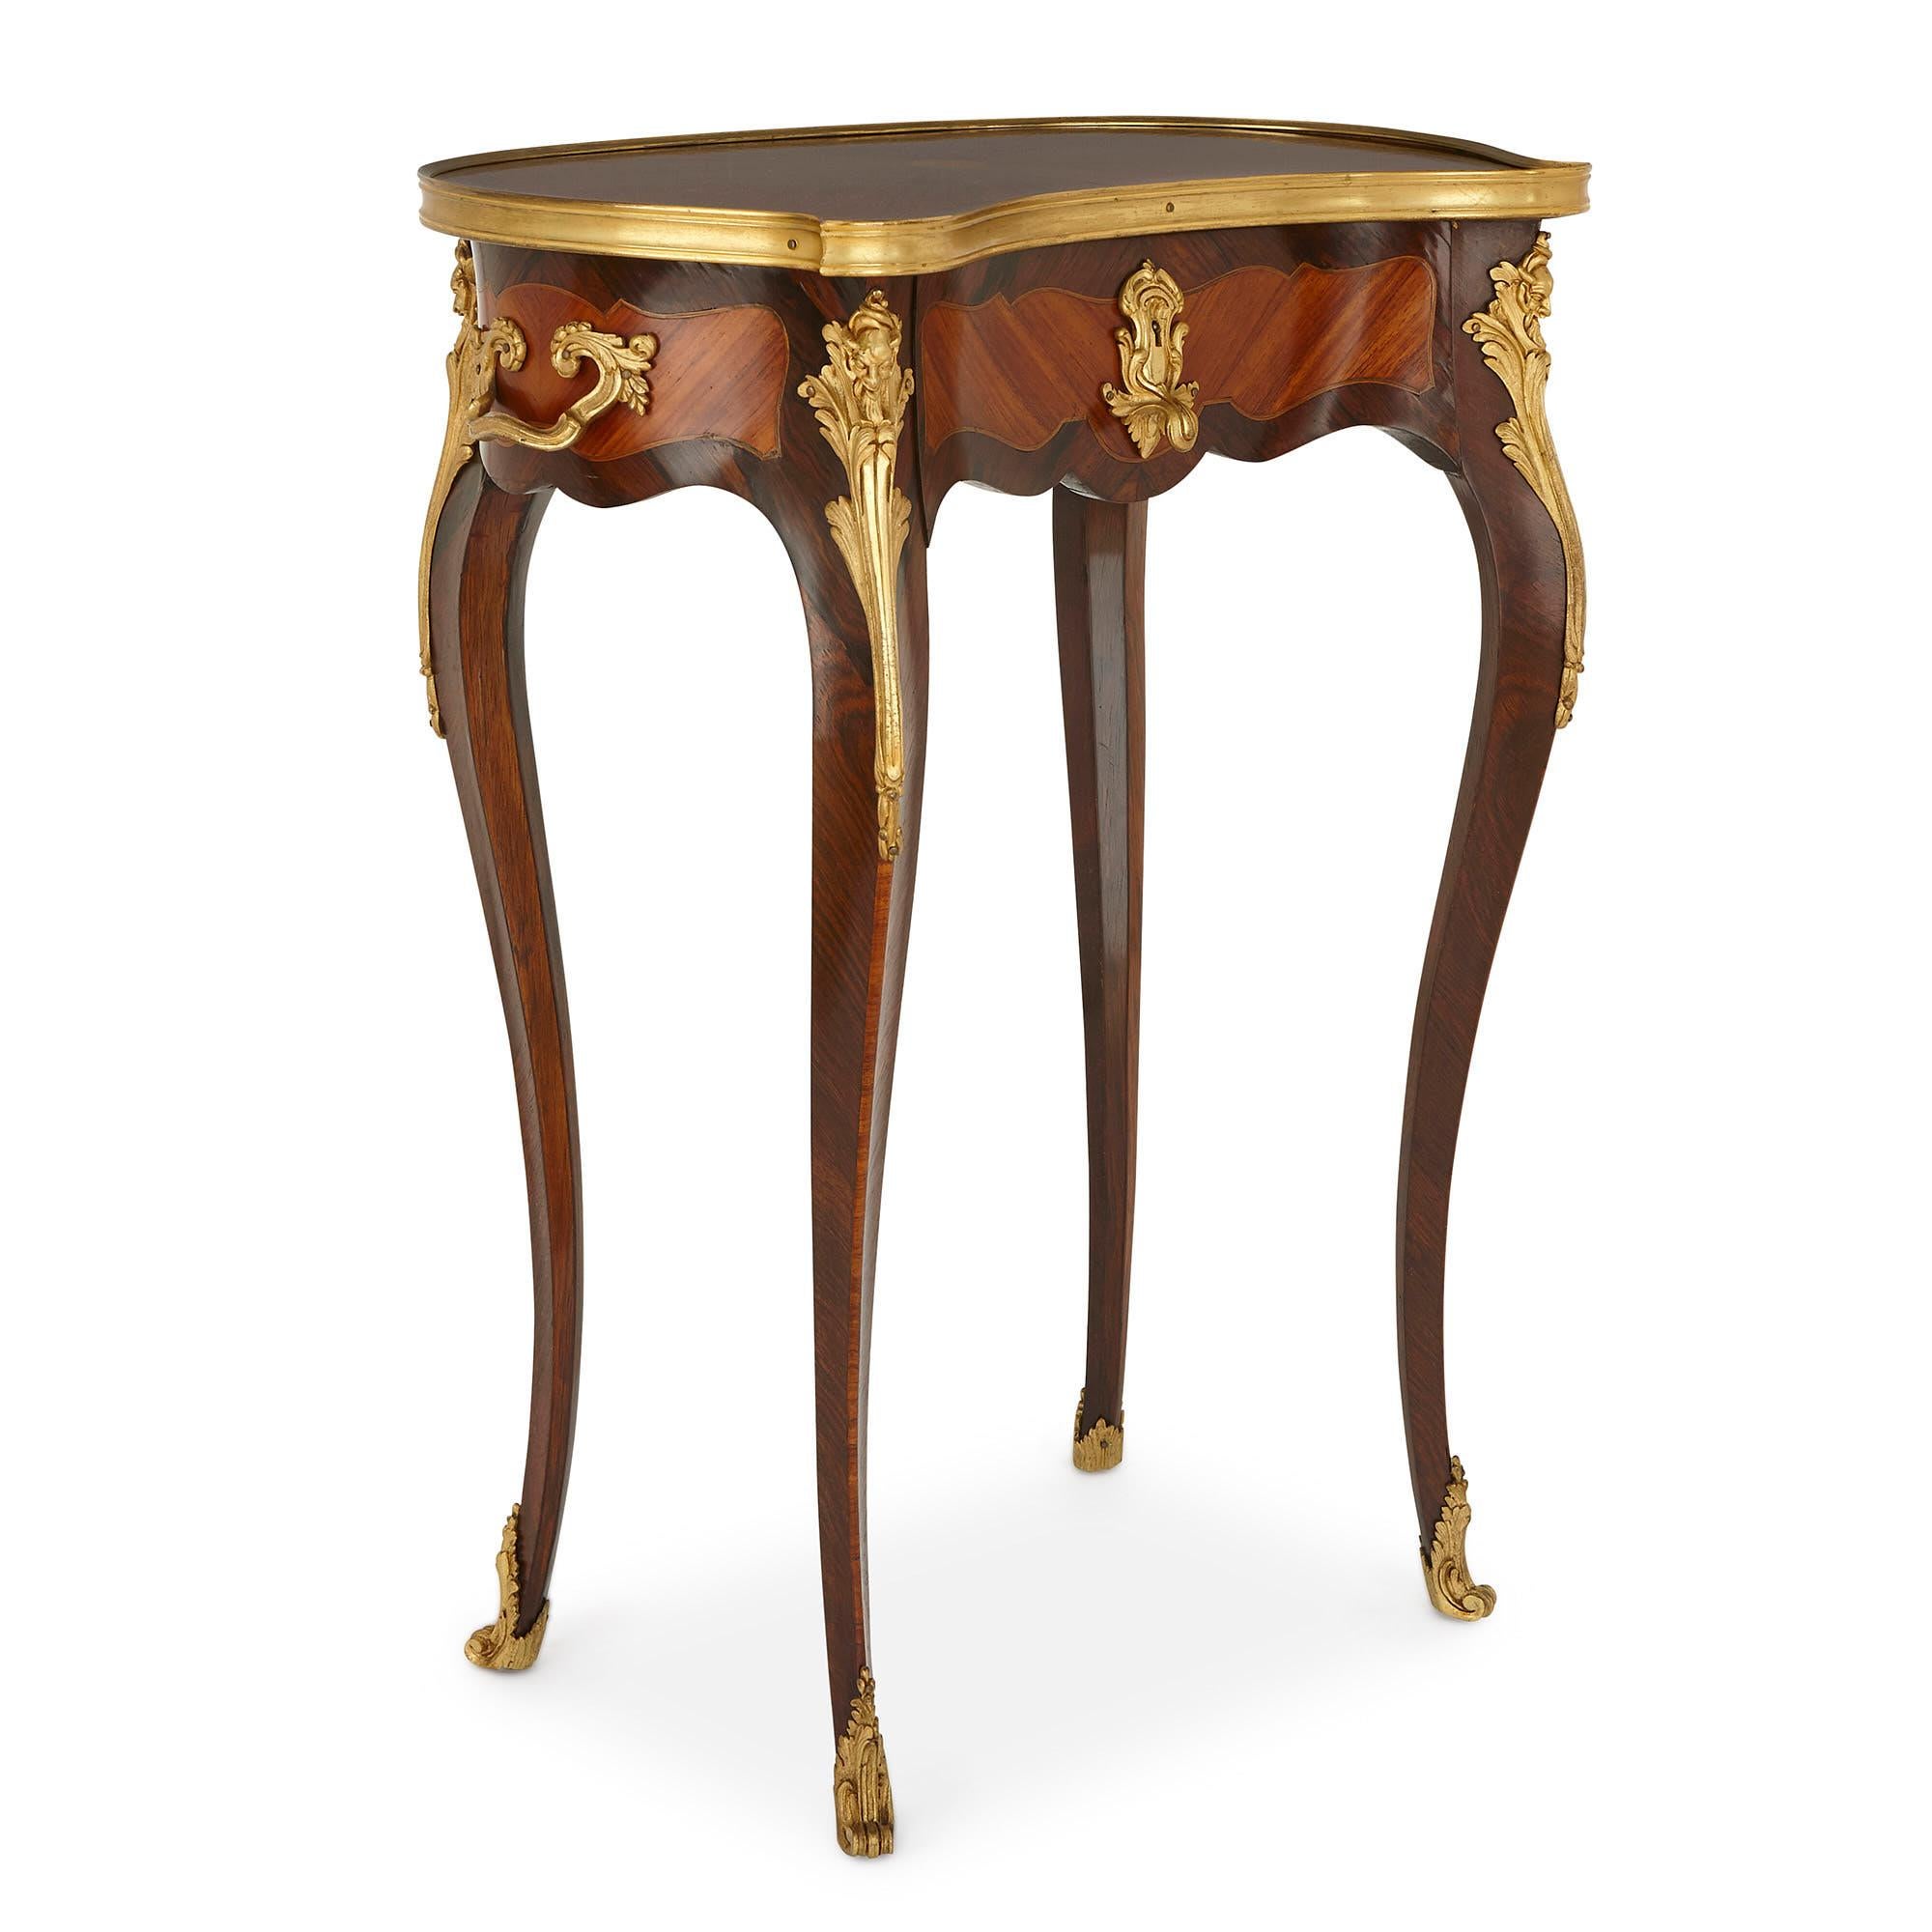 Each occasional table features four scrolled gilt bronze feet, which extend upwards to form rosewood cabriole legs. These are decorated, on their tops, with Rococo style gilt bronze mounts, cast as grotesque masks. On each, the legs support the body